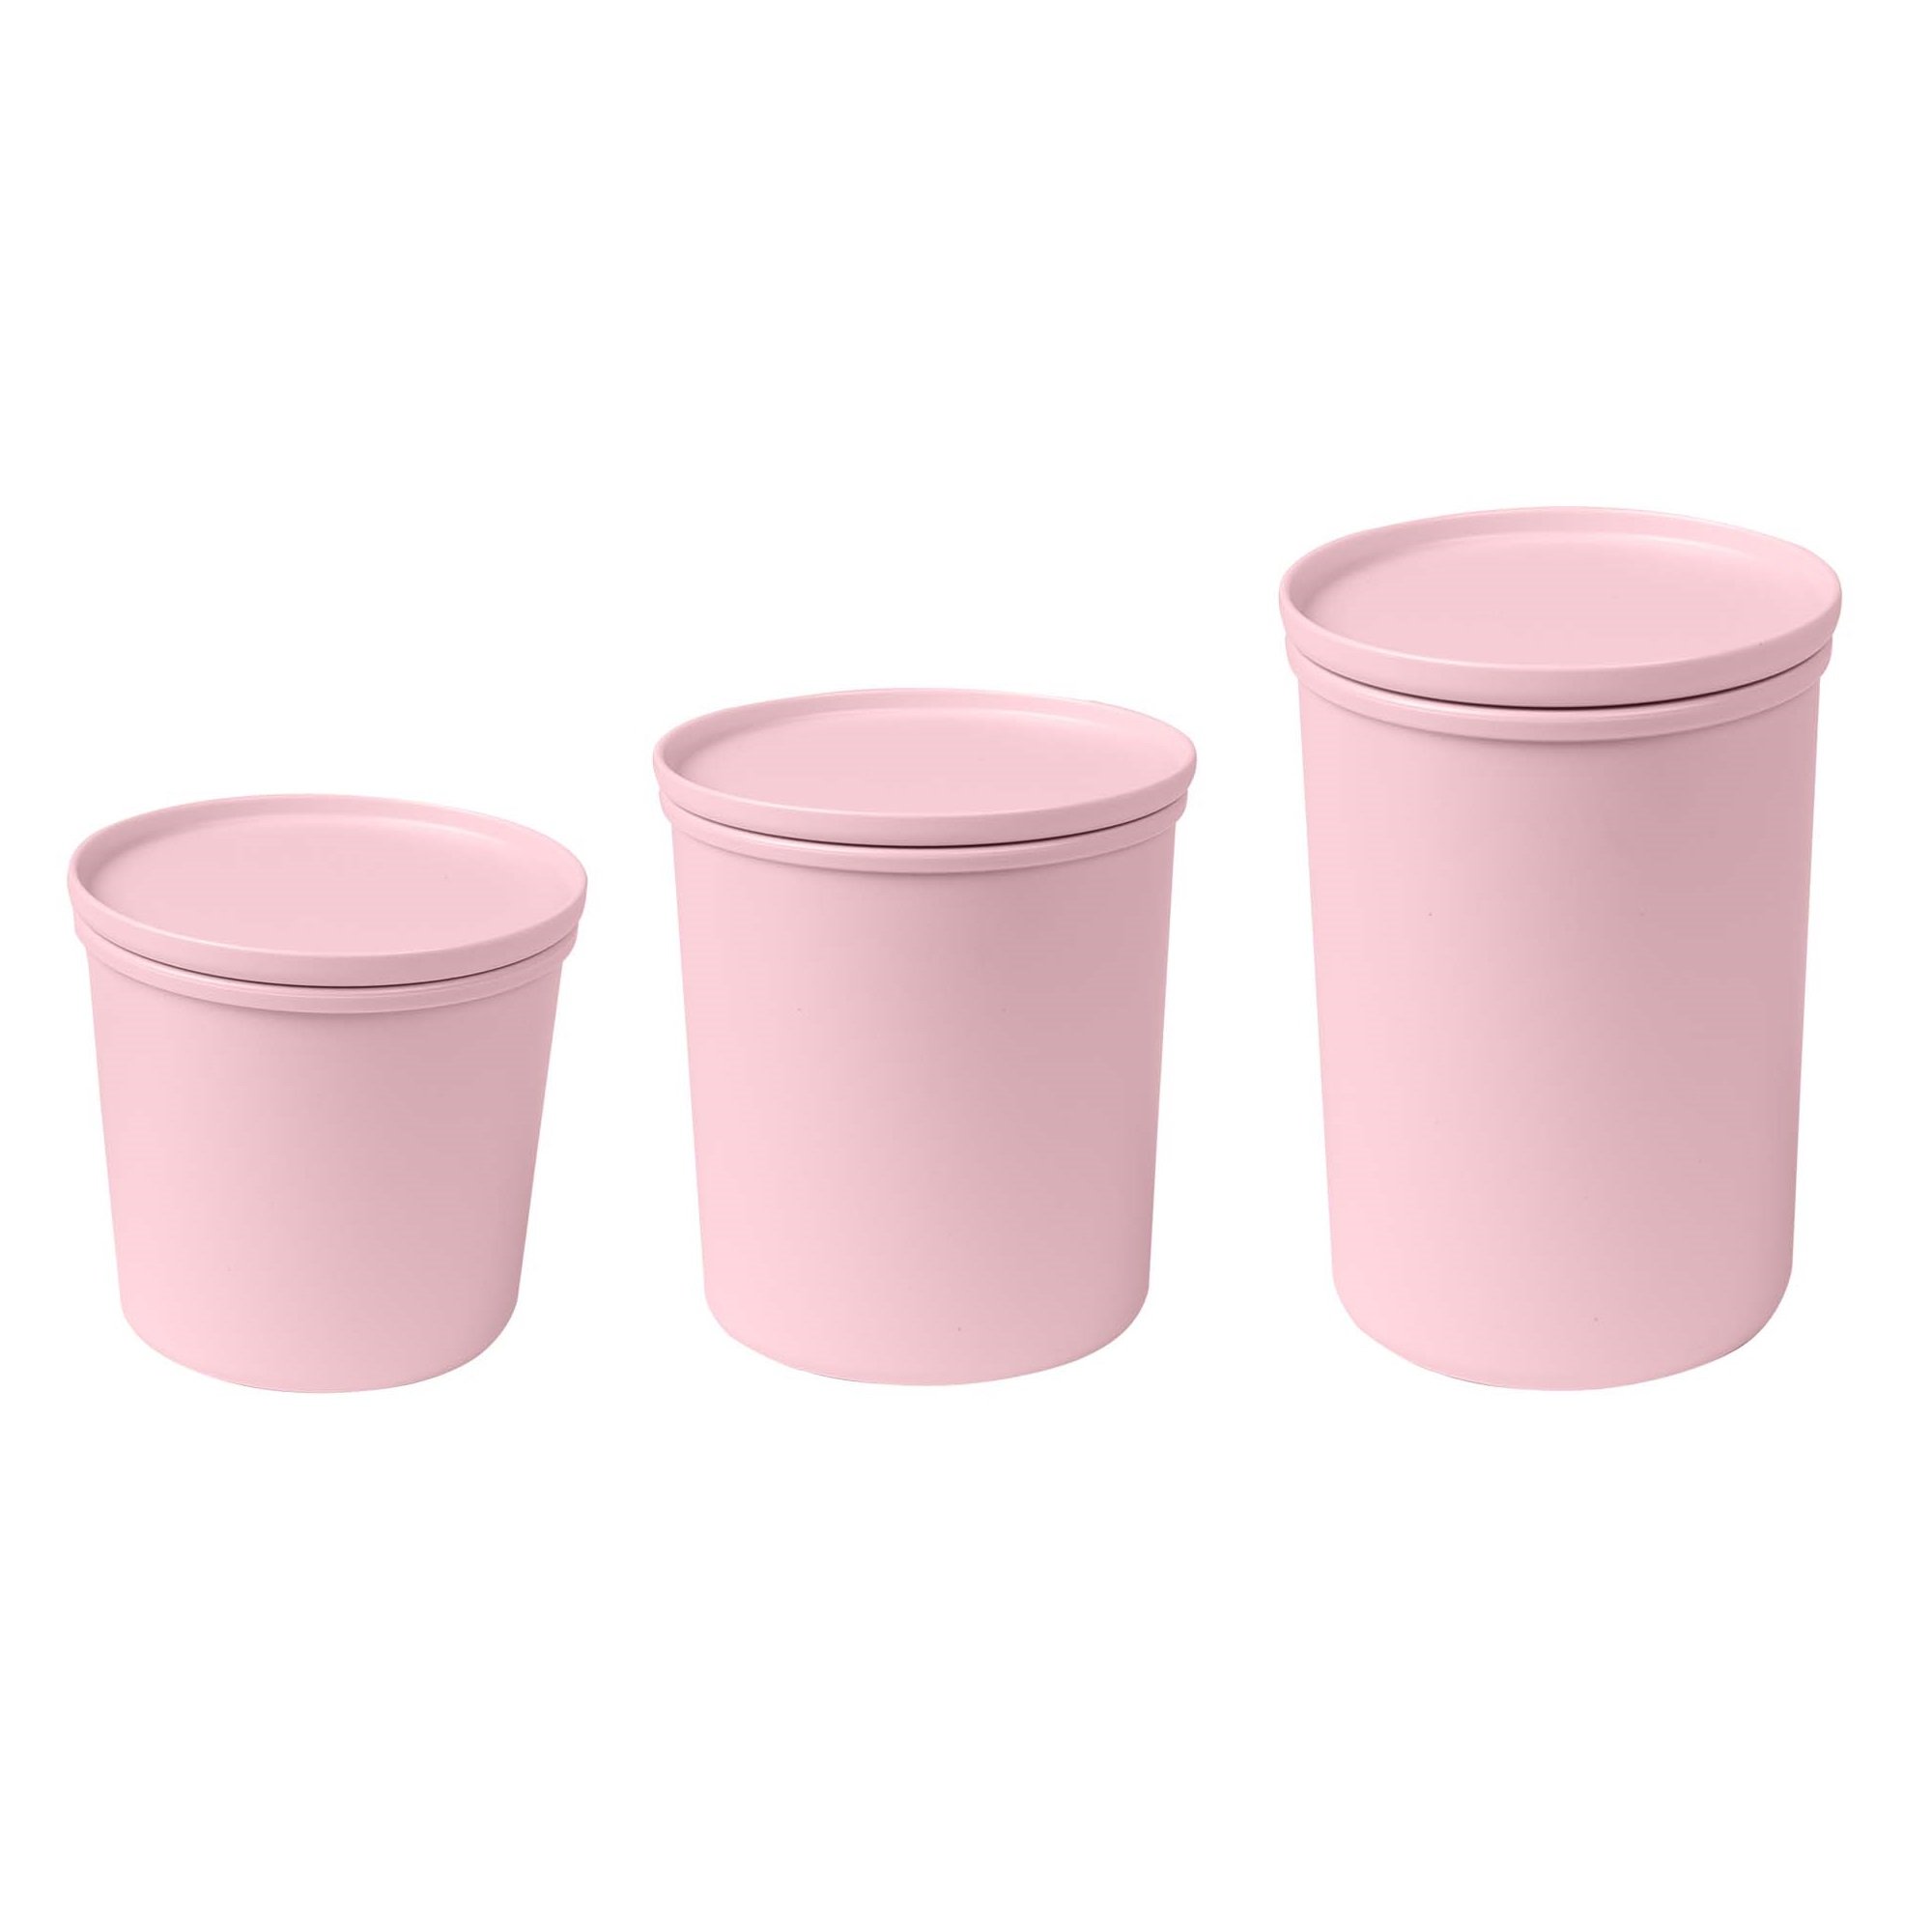 AWAVE® 3 pc Jar Set 500/800/1000 ml, Food Containers with Lid made from rPET | rose